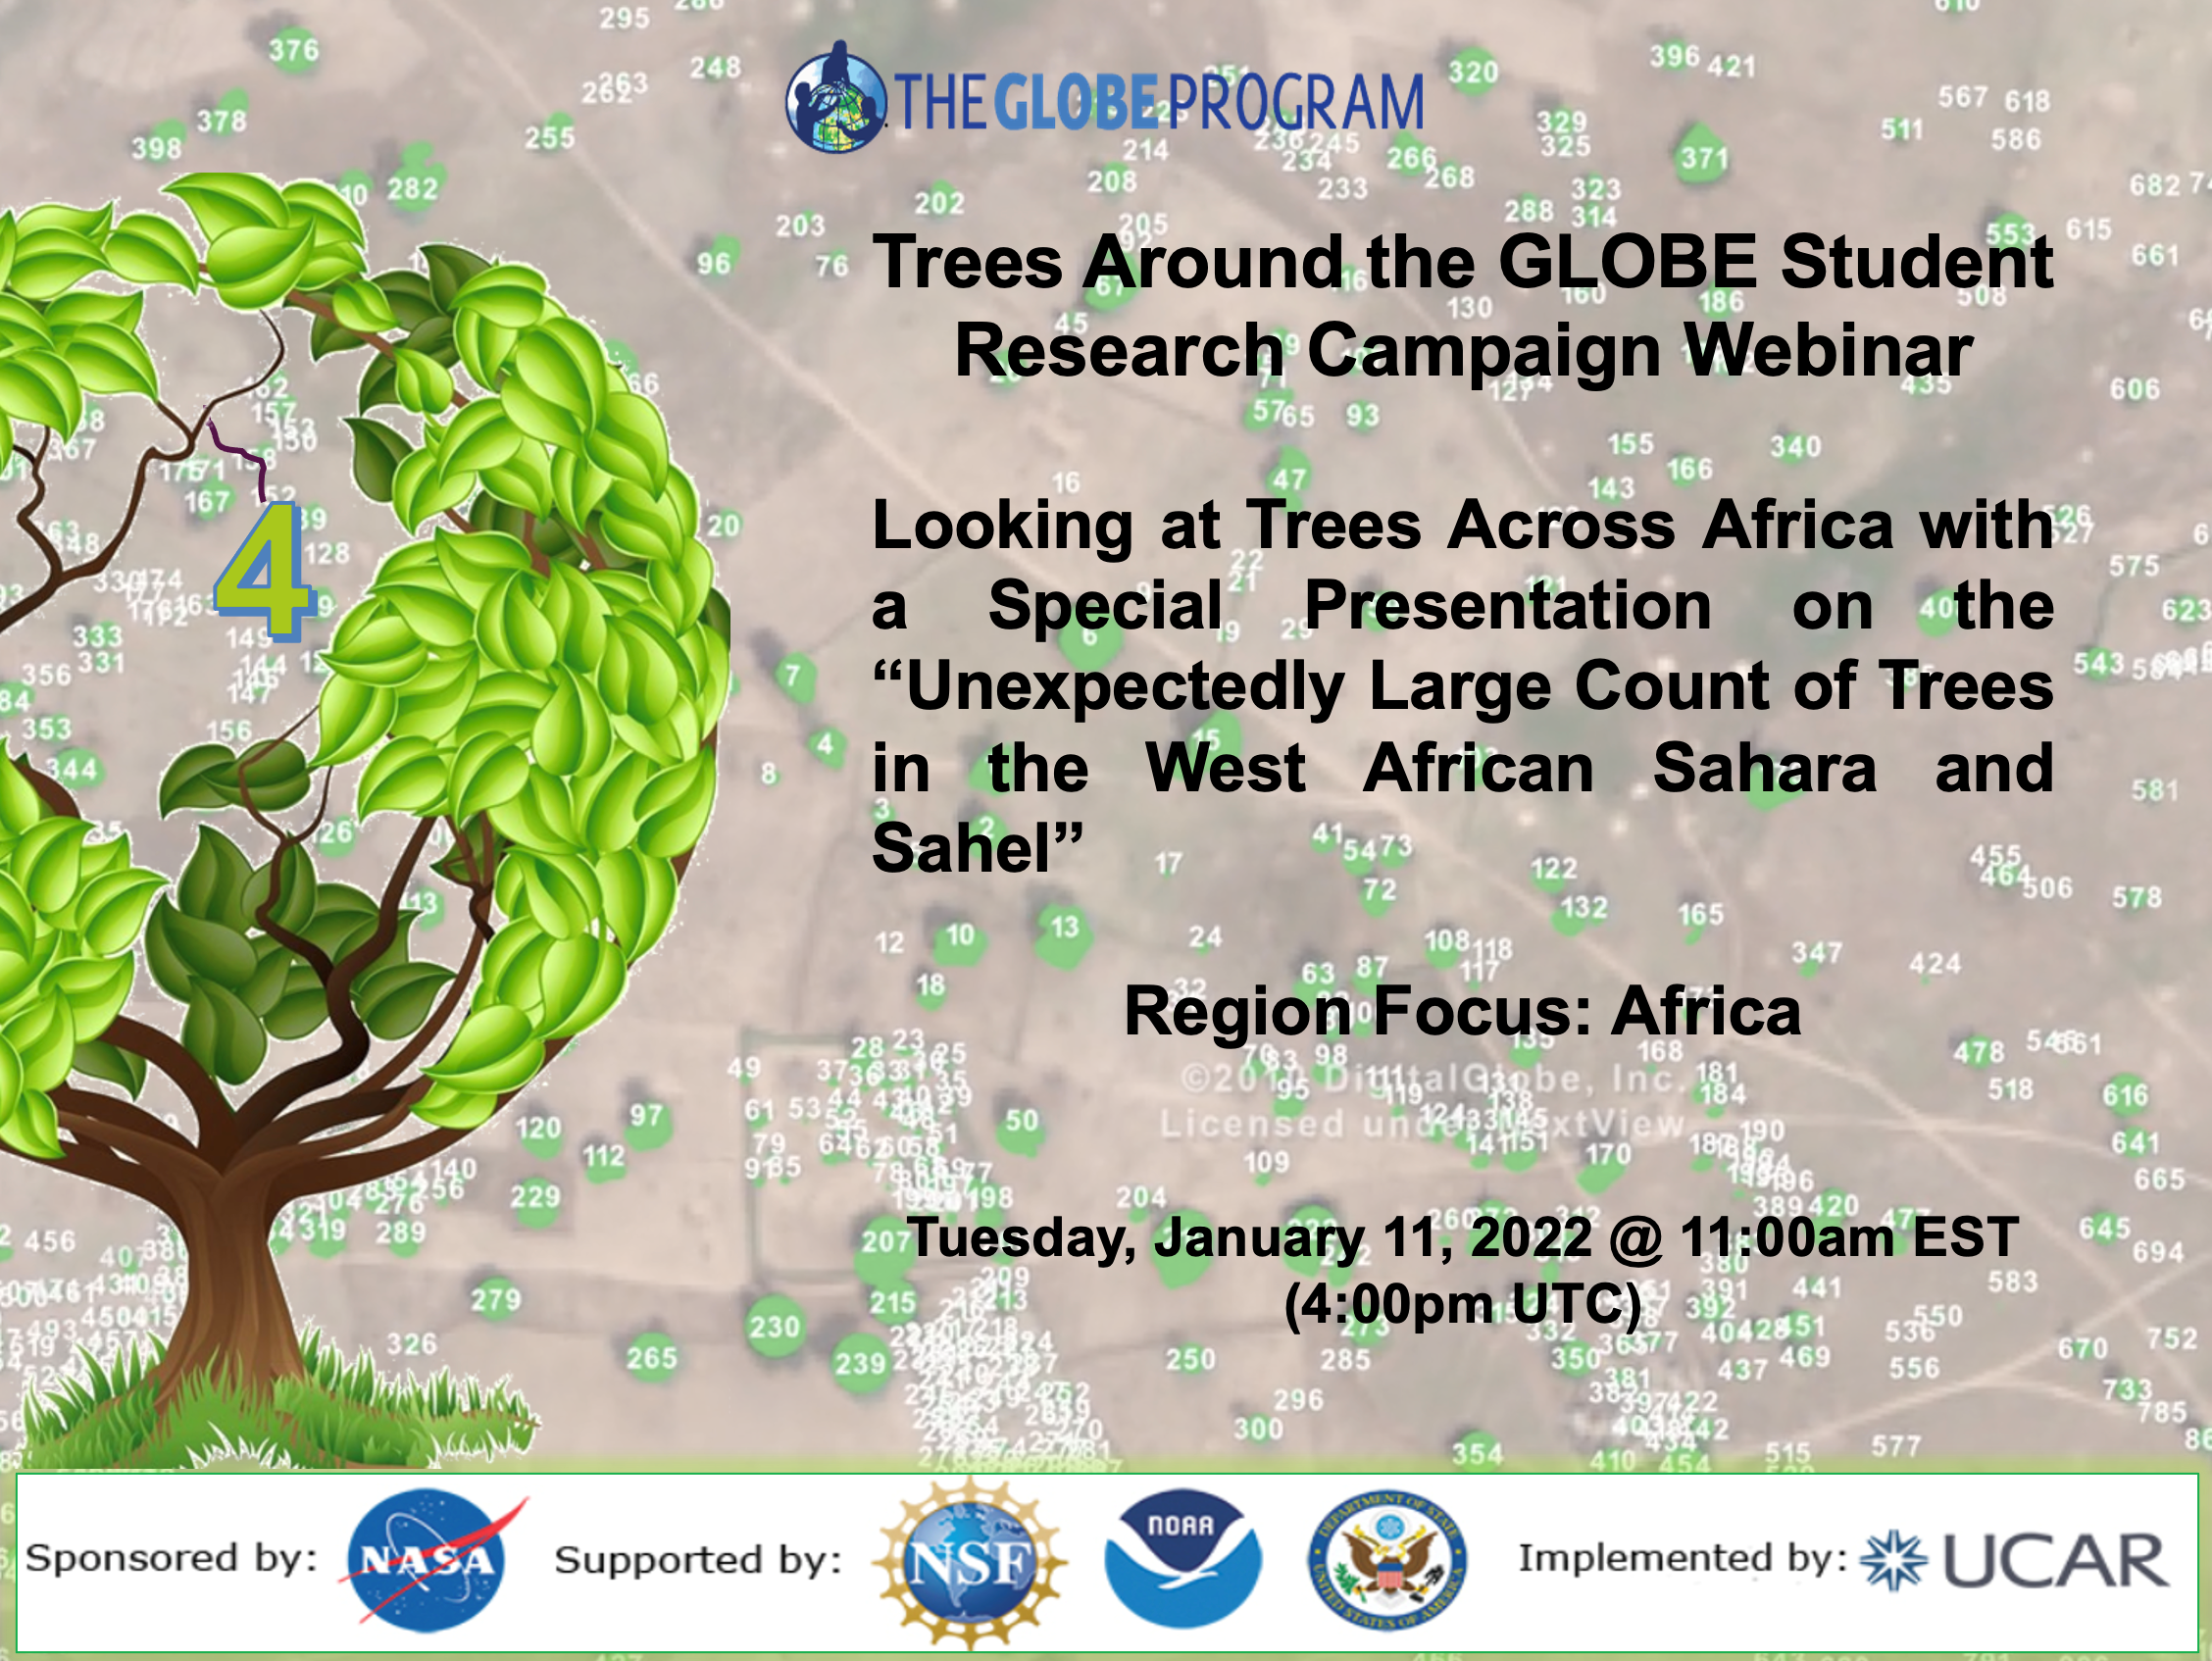 The Trees Around the GLOBE 11 January 2022 webinar shareable, which shows a tree and displays the title, date, and time of the webinar